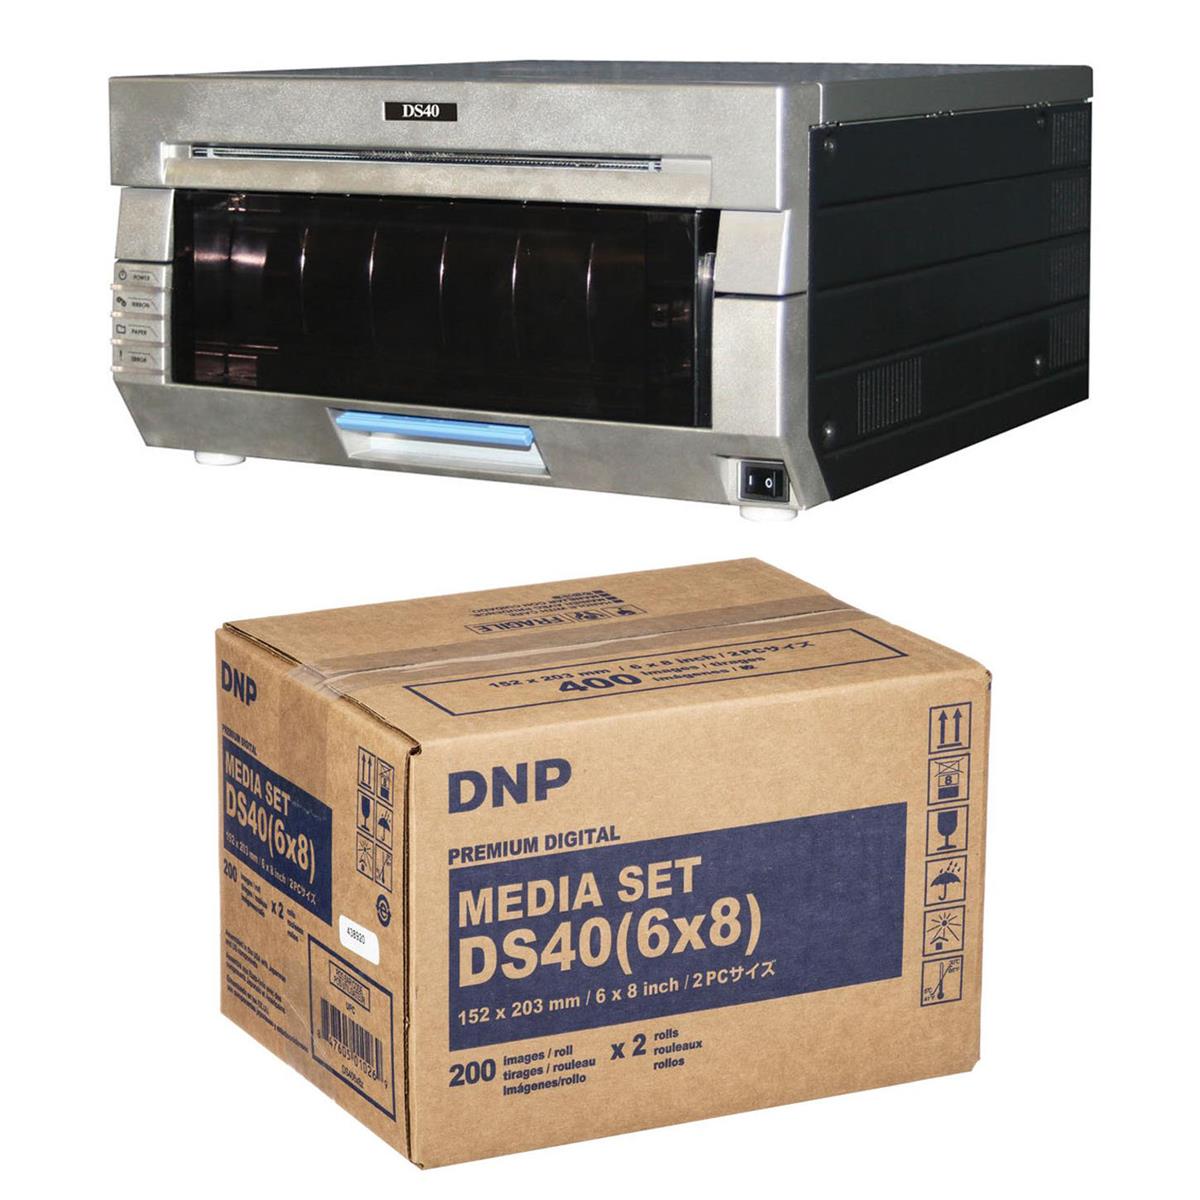 

DNP DS40 Dye Sub Pro Color Photo Printer, Refurbished with 6x8" Print Pack